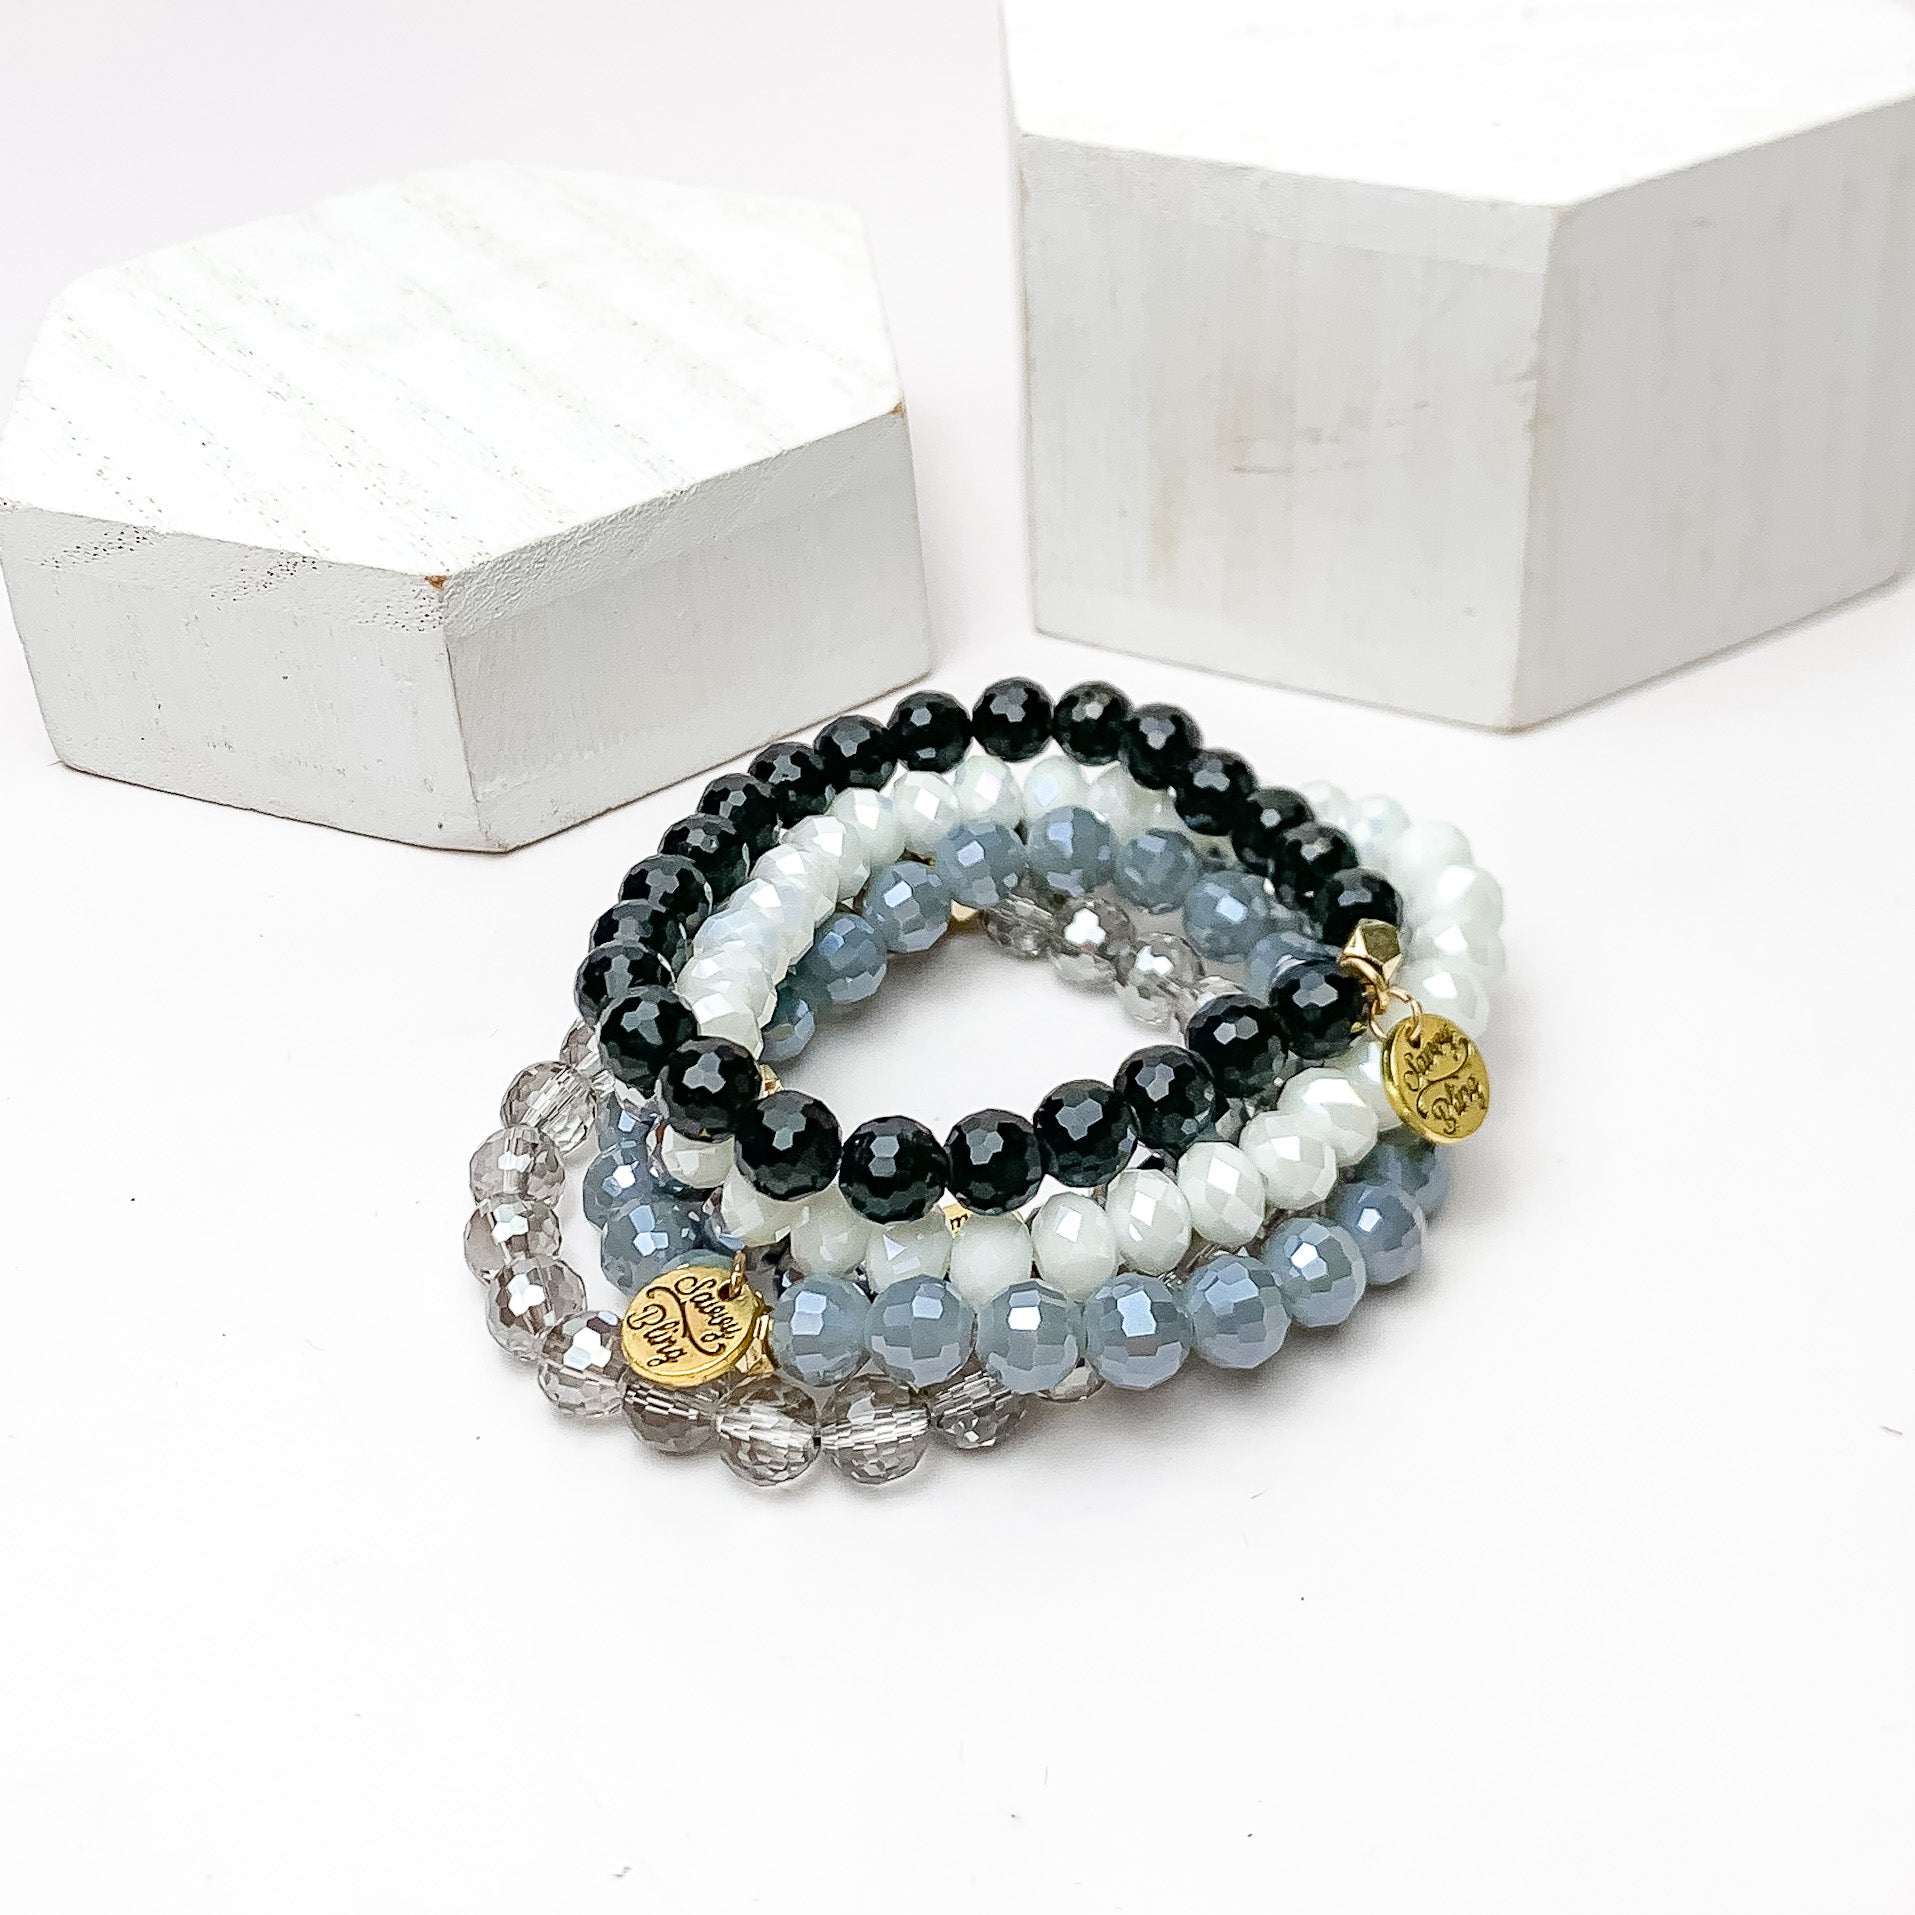 Set of Five | All Nighter Crystal Beaded Bracelet Set in Grey, Black, And White - Giddy Up Glamour Boutique